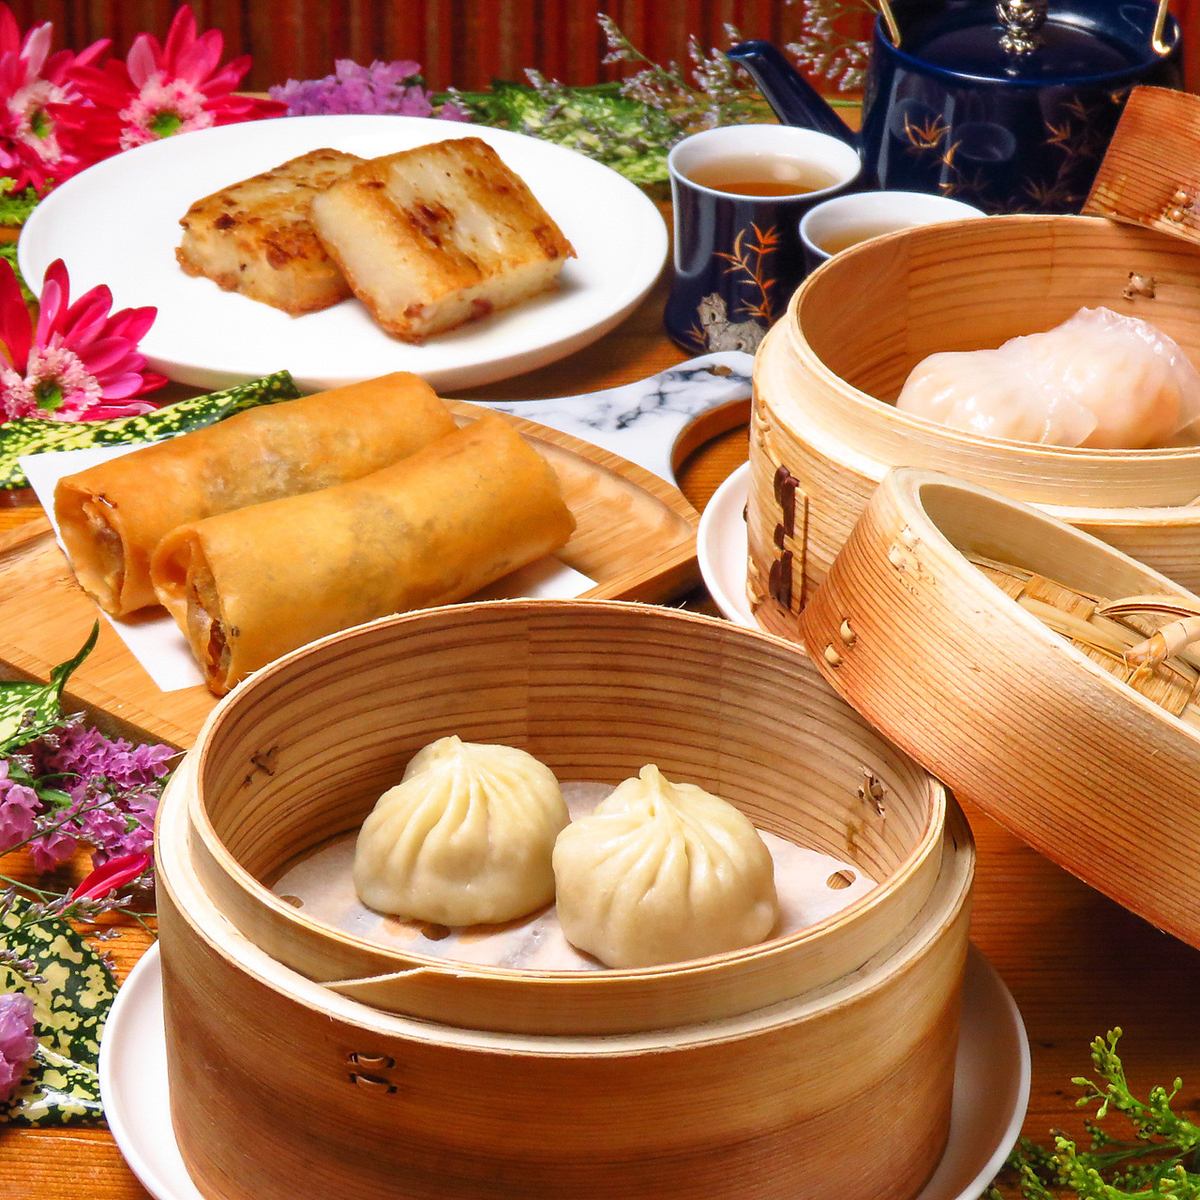 A number of exquisite dishes prepared by top Hong Kong chefs with original recipes ☆